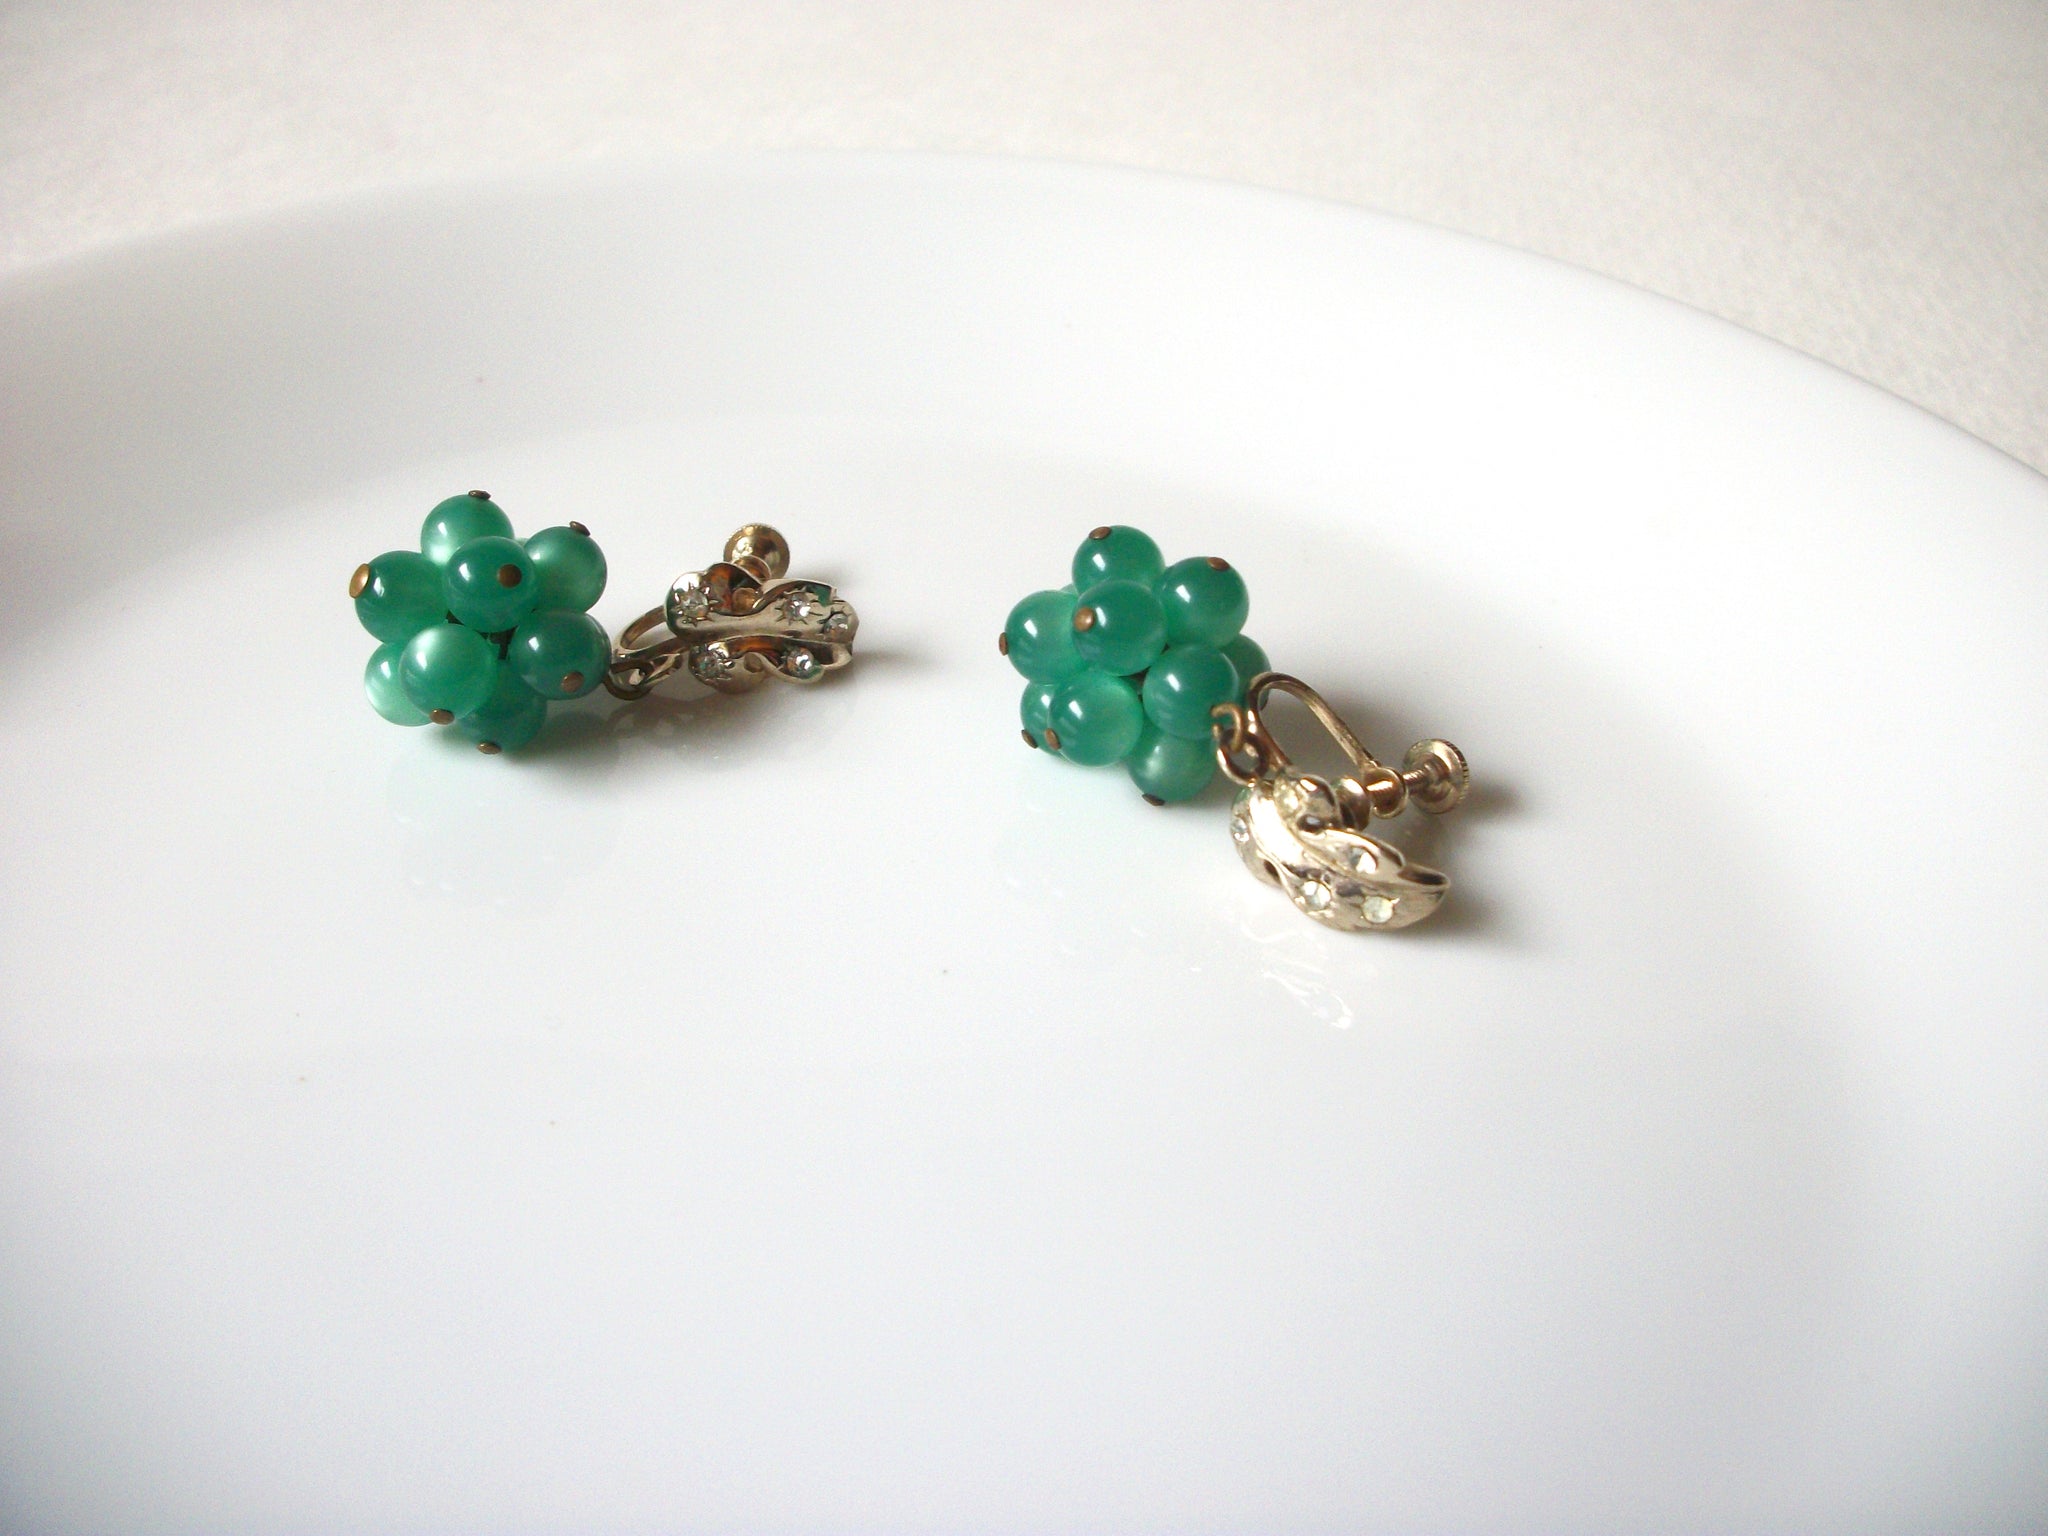 Vintage Turquoise Green Lucite Screw Back Earrings 71820